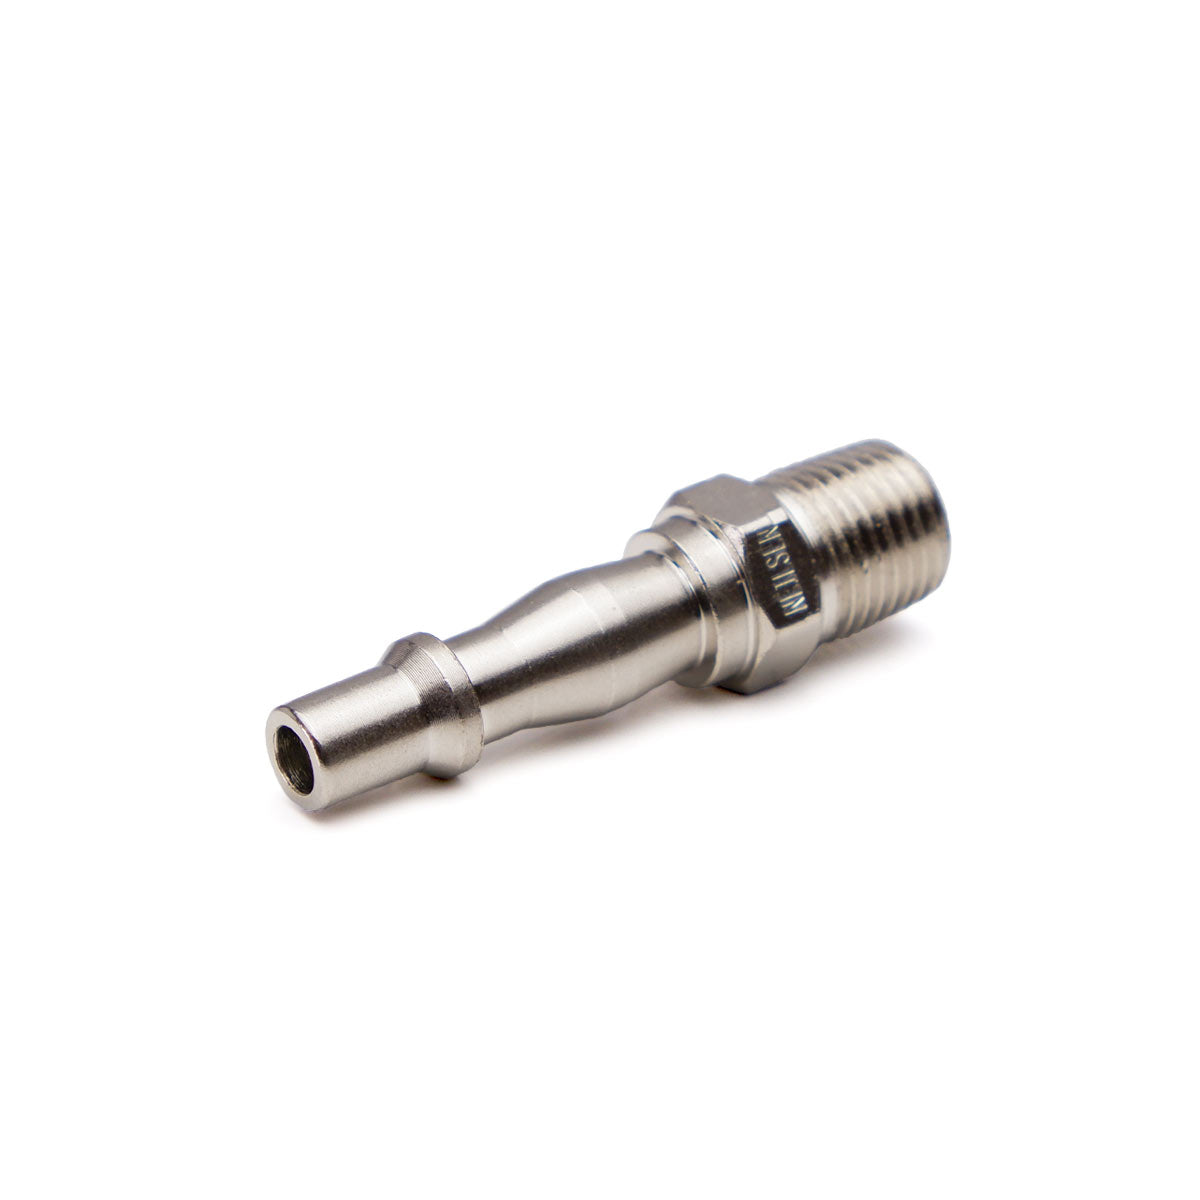 PCL Male Airline connector - Underpinner Spares